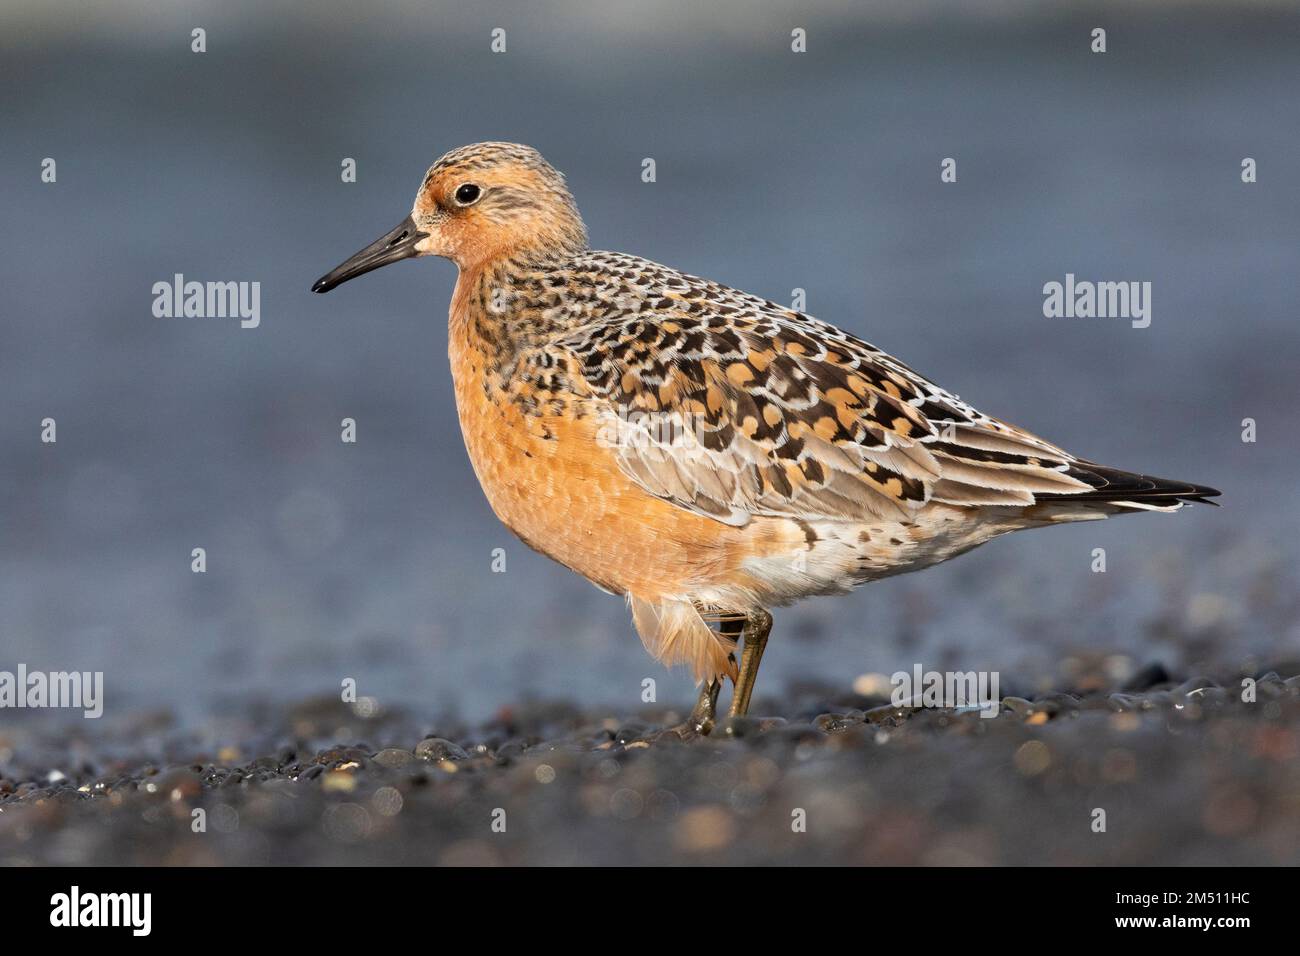 Red Knot (Calidris canutus islandica), side view of an adult standing on the shore, Northwestern Region, Iceland Stock Photo